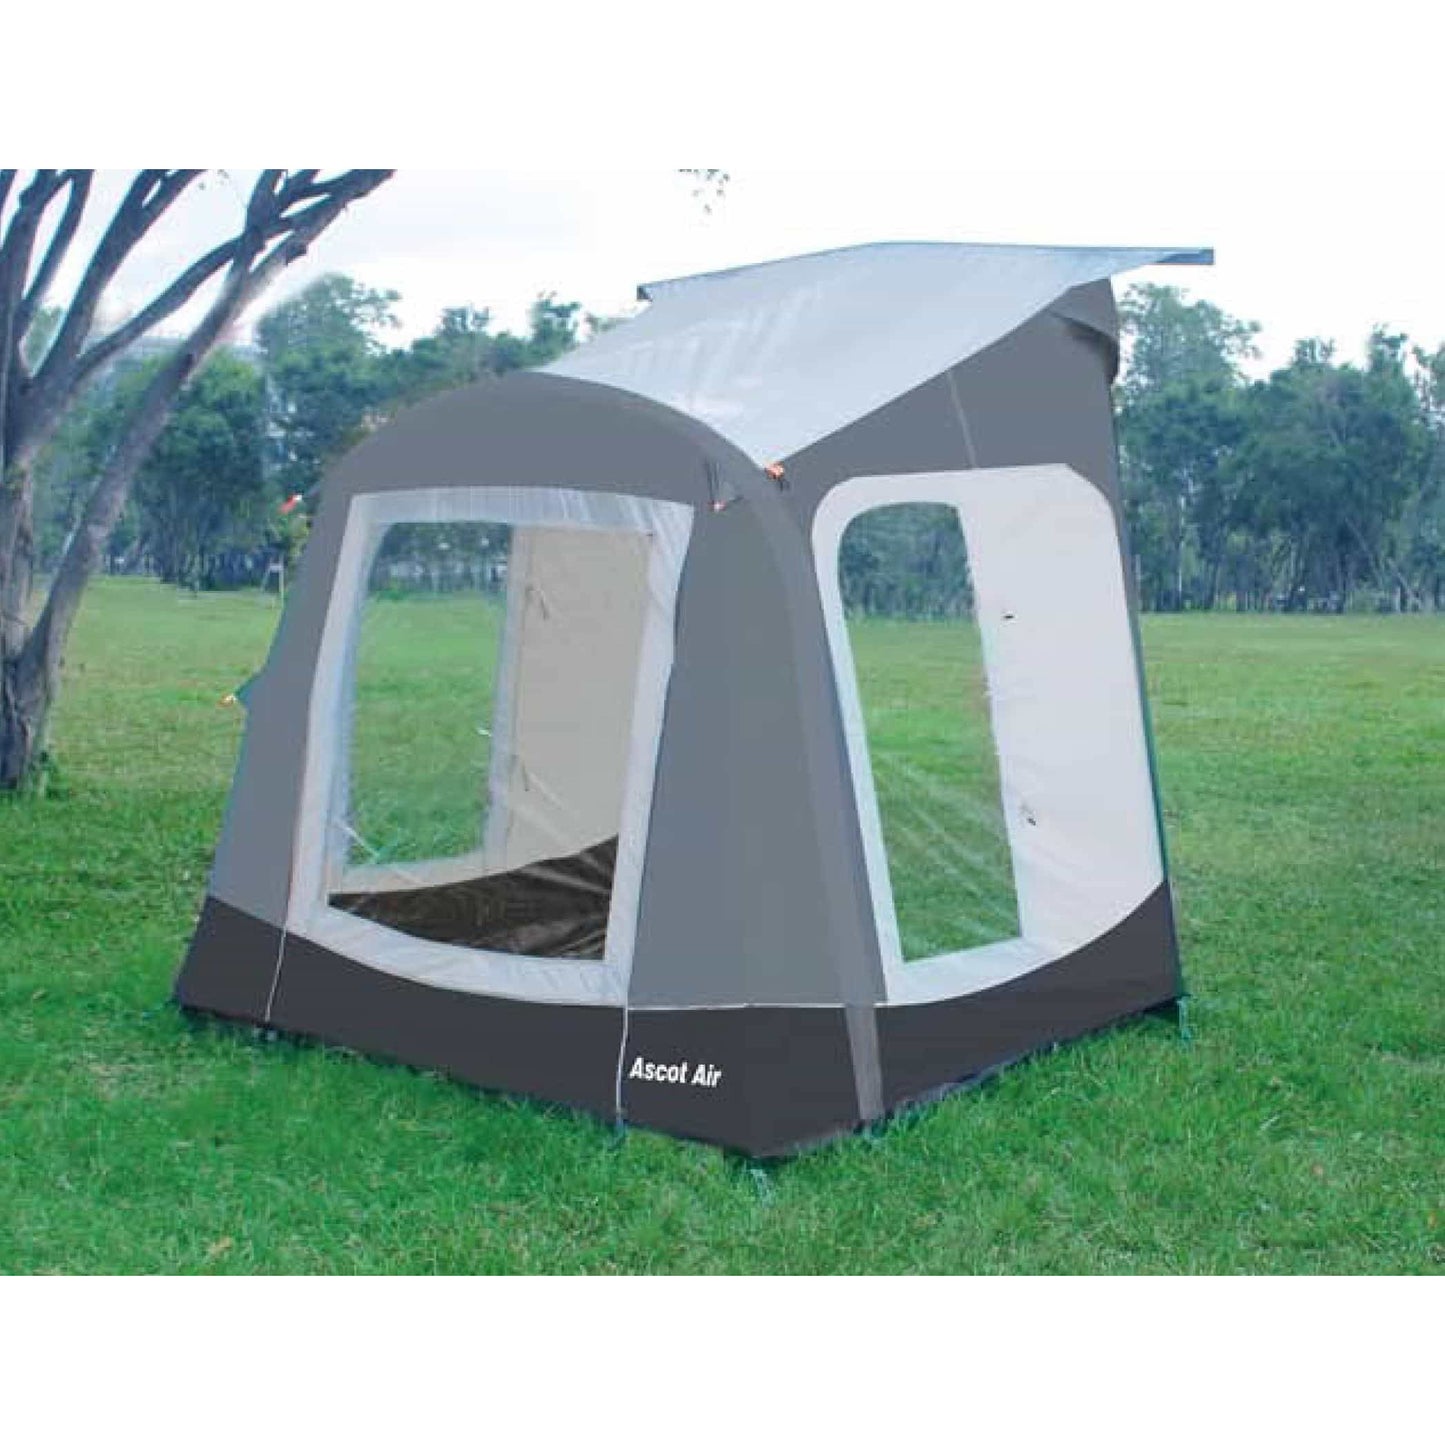 Camptech Ascot Air Inflatable Porch Caravan Awning (2019) + Free Storm Straps made by CampTech. A Air Awning sold by Quality Caravan Awnings